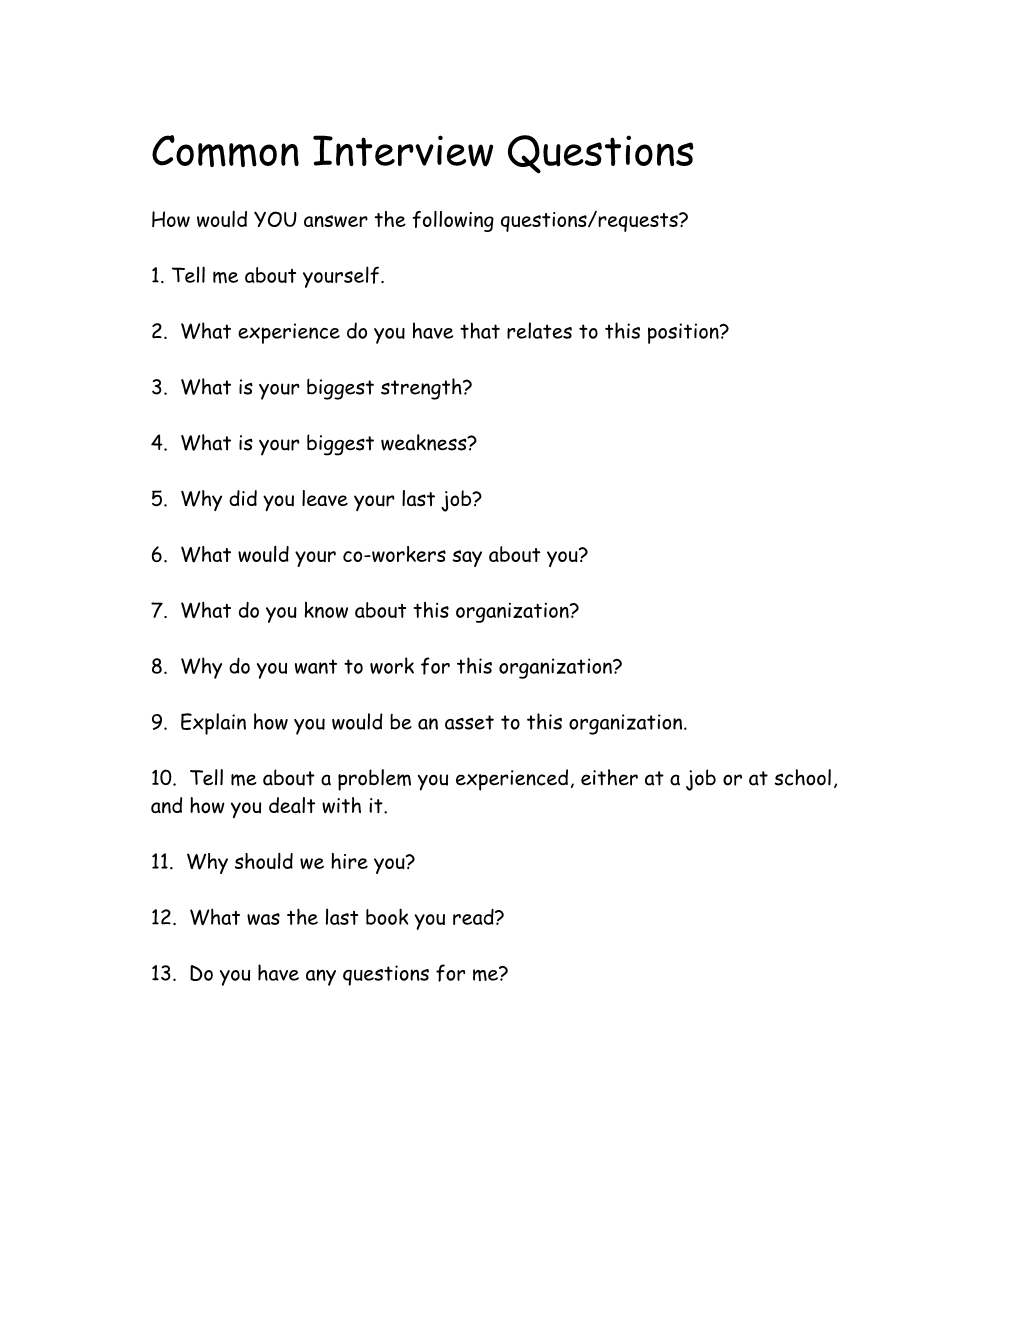 How Would YOU Answer the Following Questions/Requests?